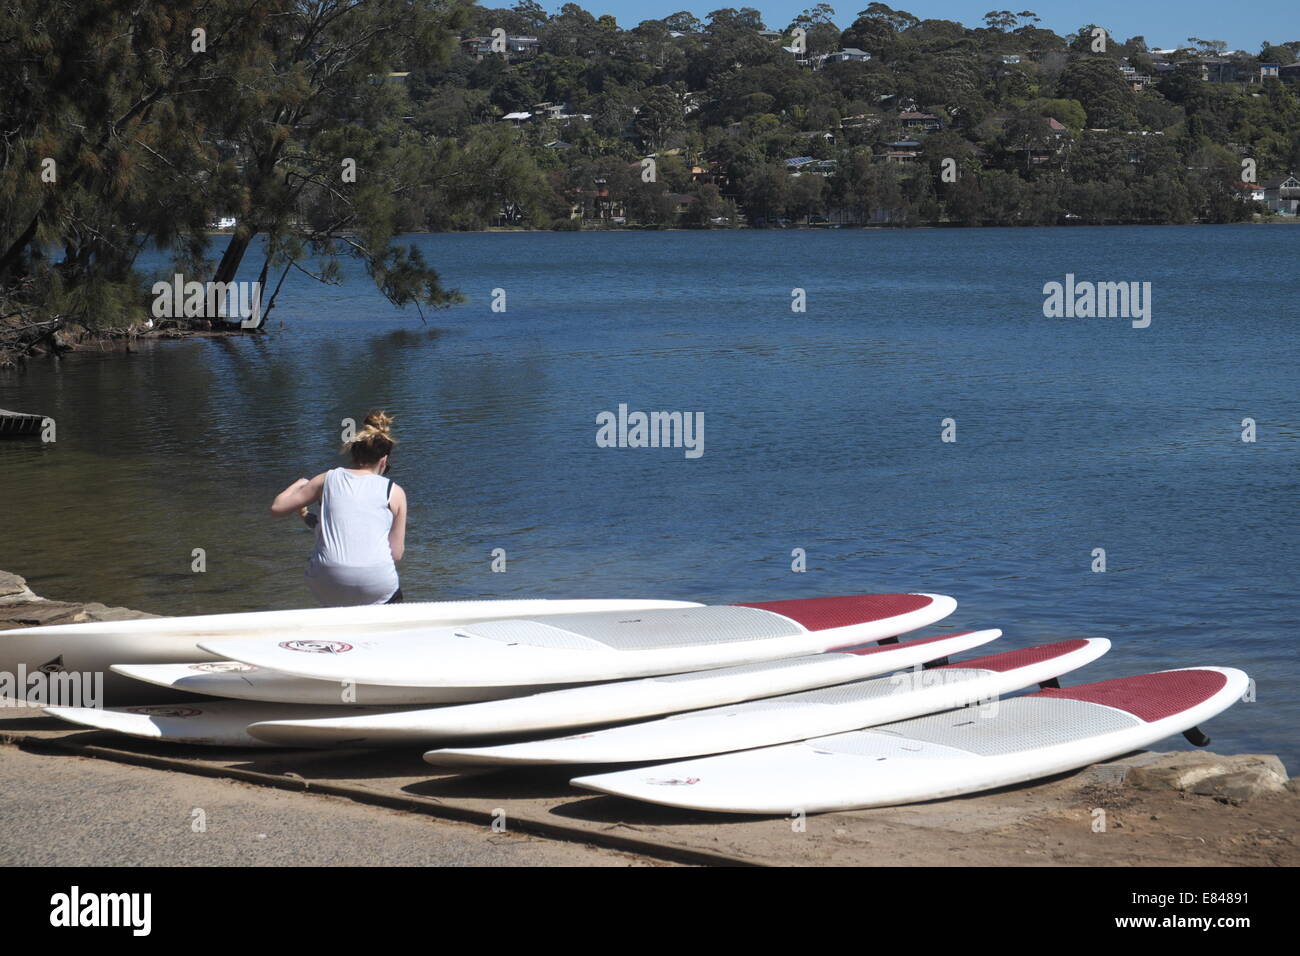 paddleboards for hire at narrabeen lake,sydney,australia Stock Photo